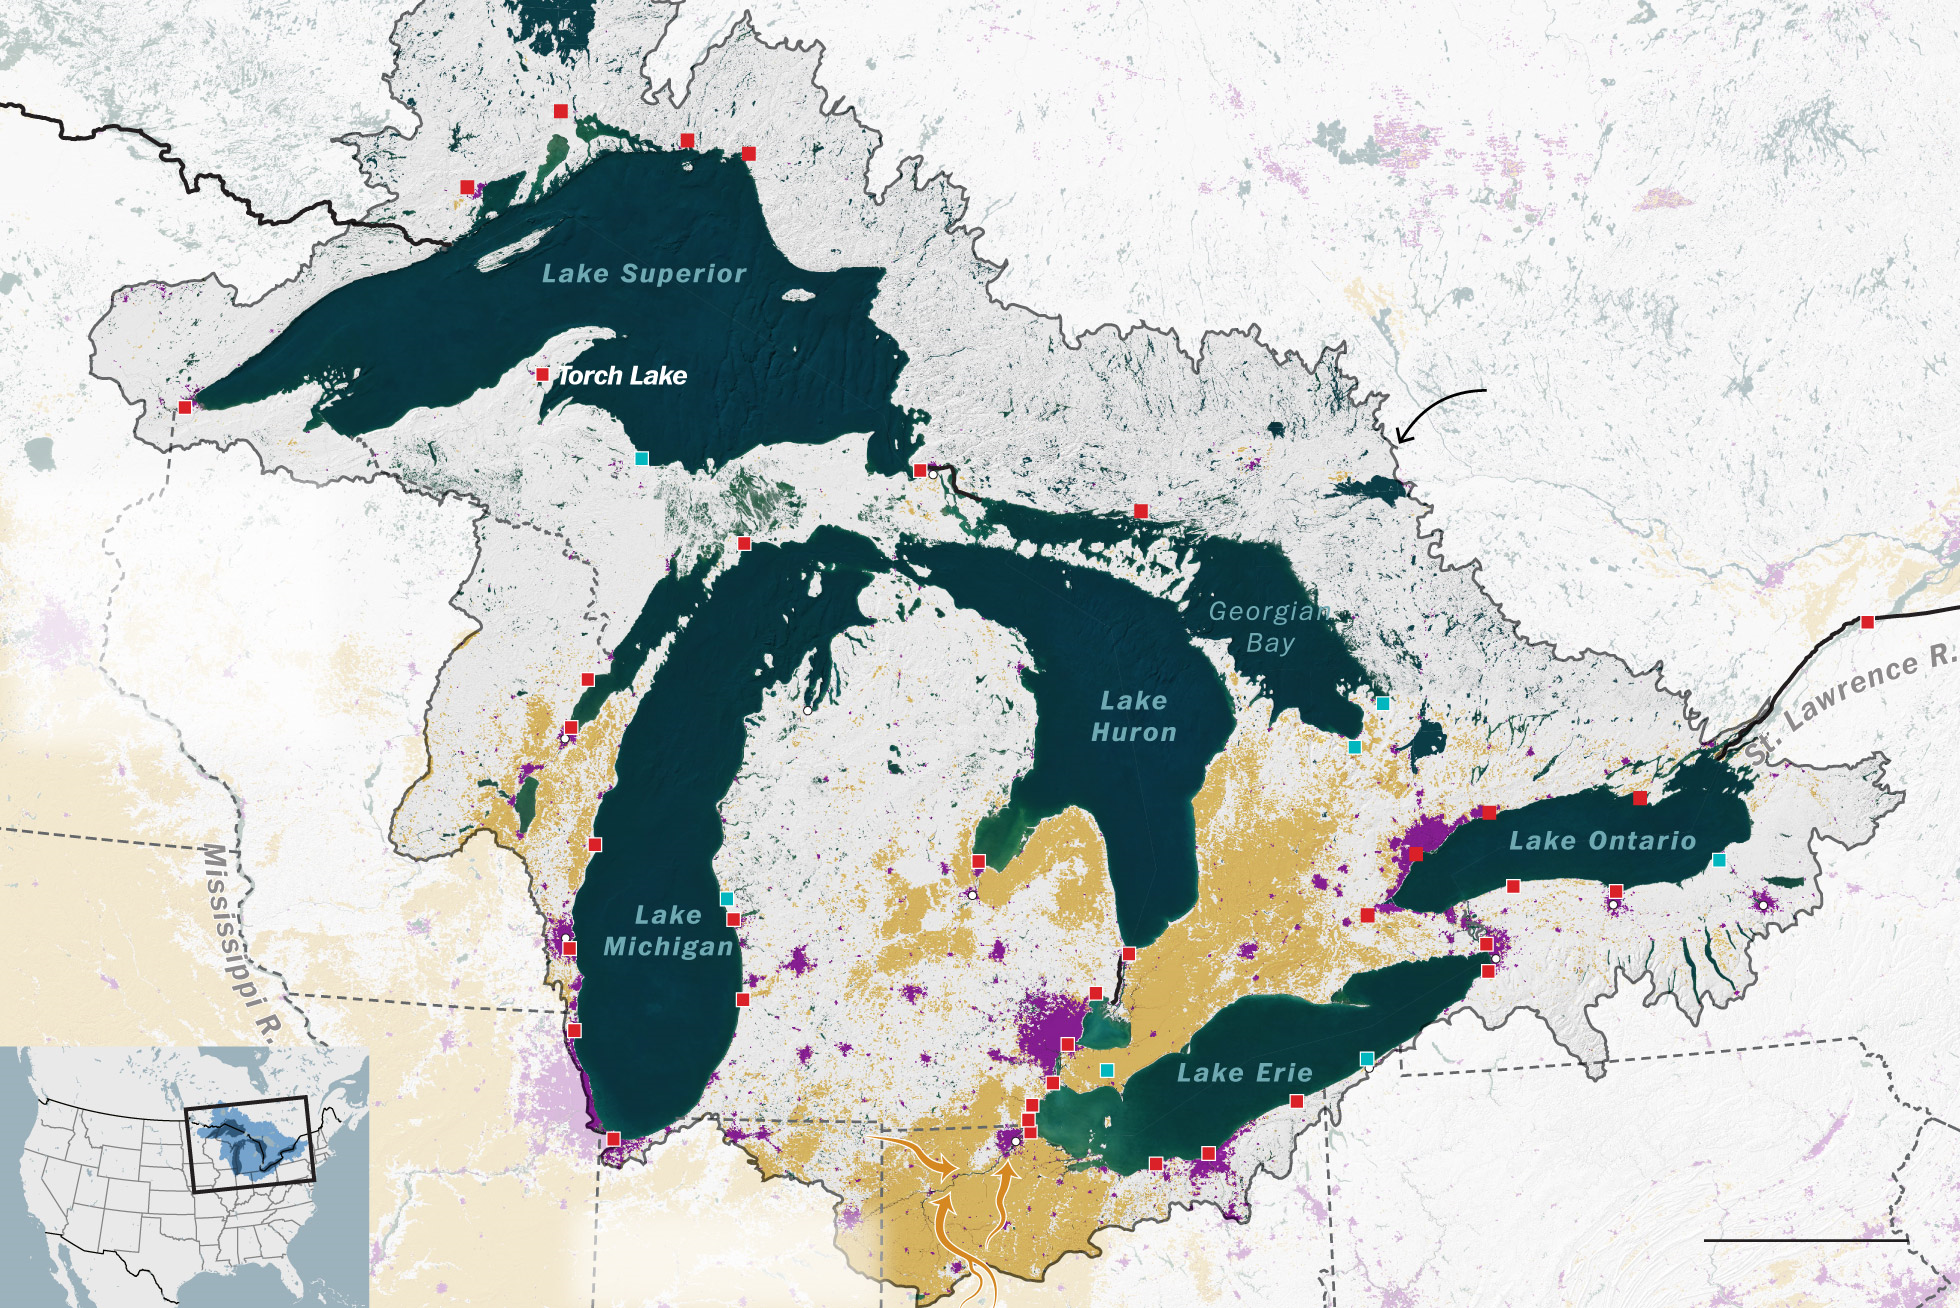 The Great Lakes States Freshwater Society